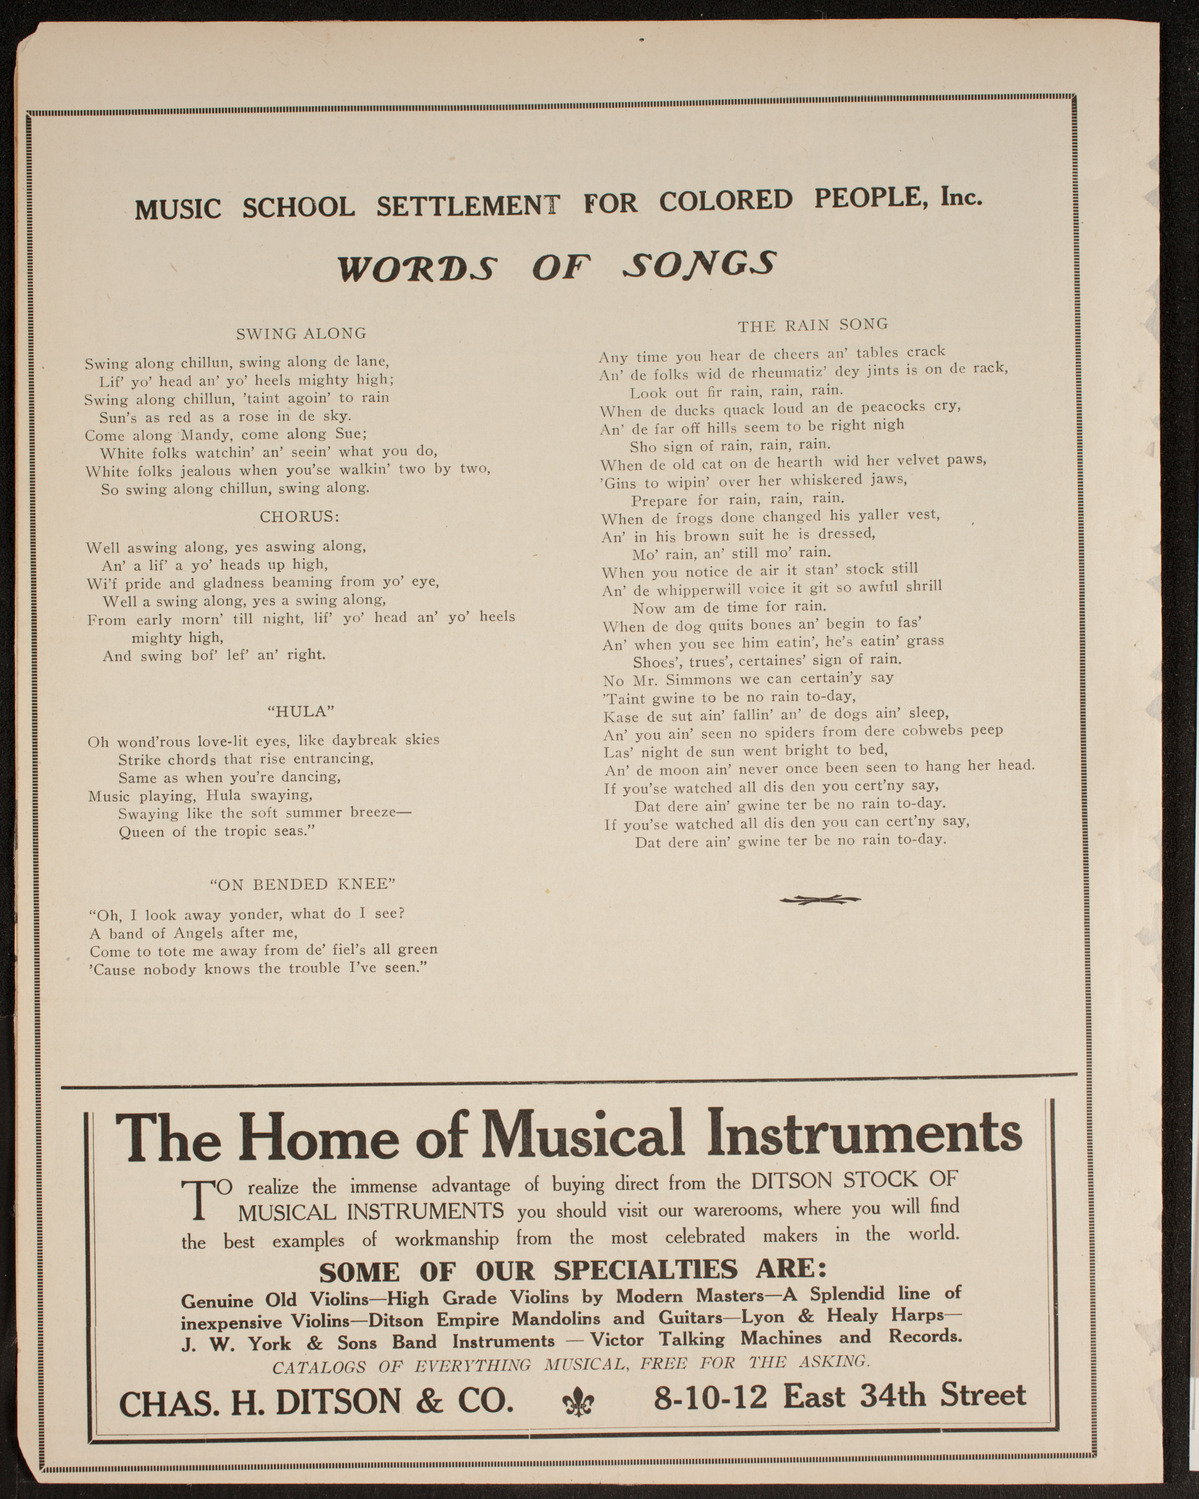 Clef Club Orchestra: Concert of Negro Music, May 2, 1912, program page 10